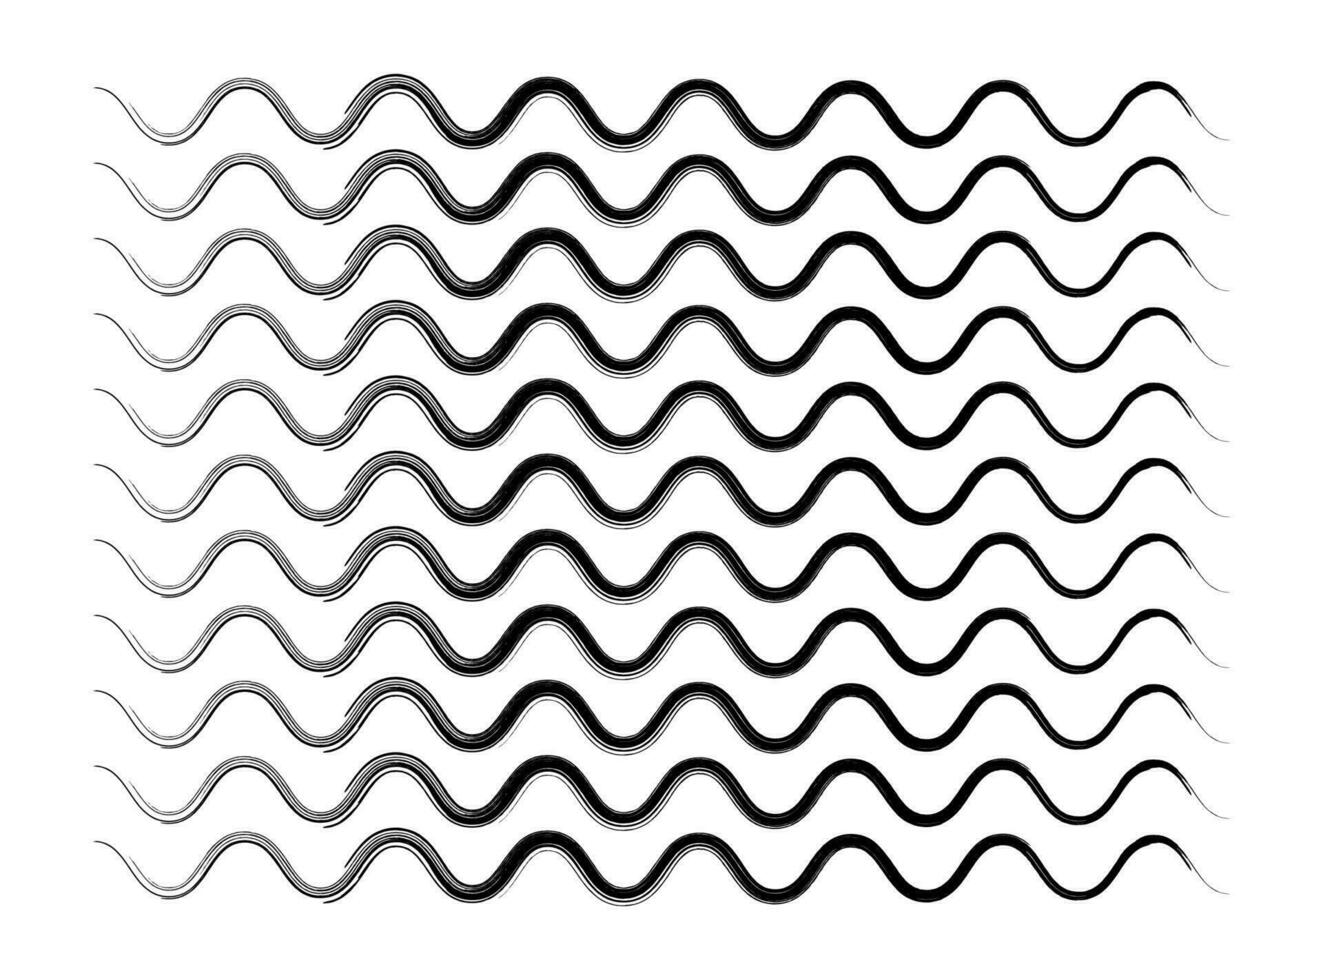 Thin wavy grunge brushes lines with a seamless pattern. Repeatable wavy zigzag lines vector pattern.